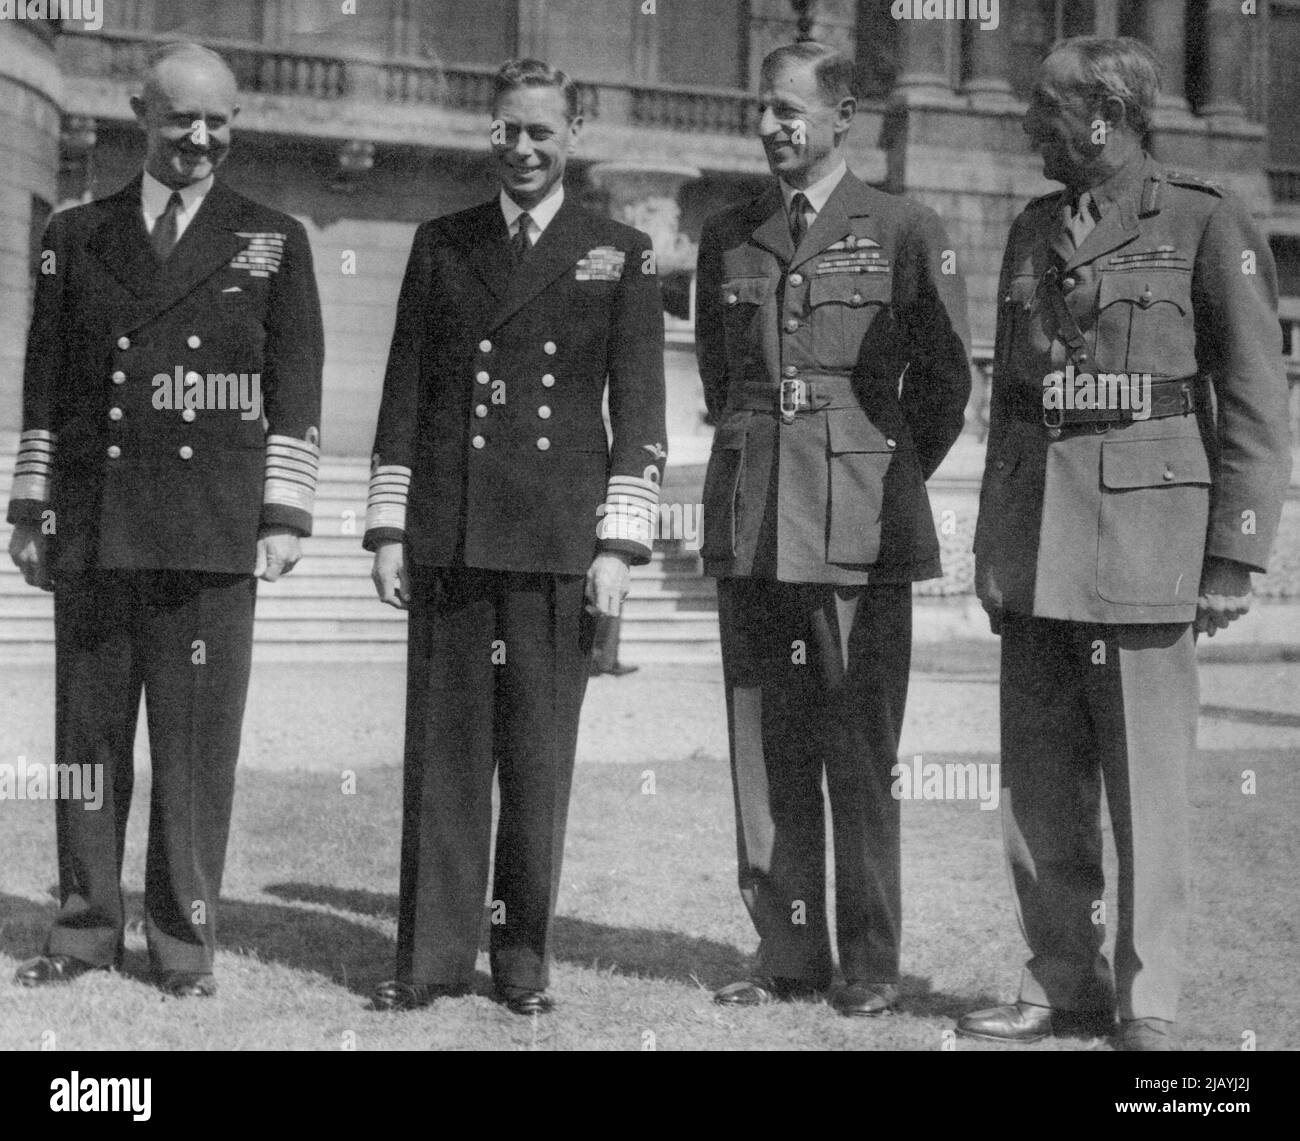 The King Receives Service Chiefs at Buckingham Palace: The King with Service Chiefs at Buckingham Palace. Left to Right: Admiral- of-the Fleet Sir Andrew Cunningham, First Sea Lord and Chief of the Naval Staff; His Majesty; Marshall of the R.A.F. Sir Charles Portal, Chief of the Air Staff; and Field Marshall Sir Alan Brooke, Chief of the Imperial General Staff. After opening the new Parliament his Majesty received Service Chiefs and Cabinet Ministers at Buckingham Palace. August 15, 1945. (Photo by Planet News Ltd.). Stock Photo